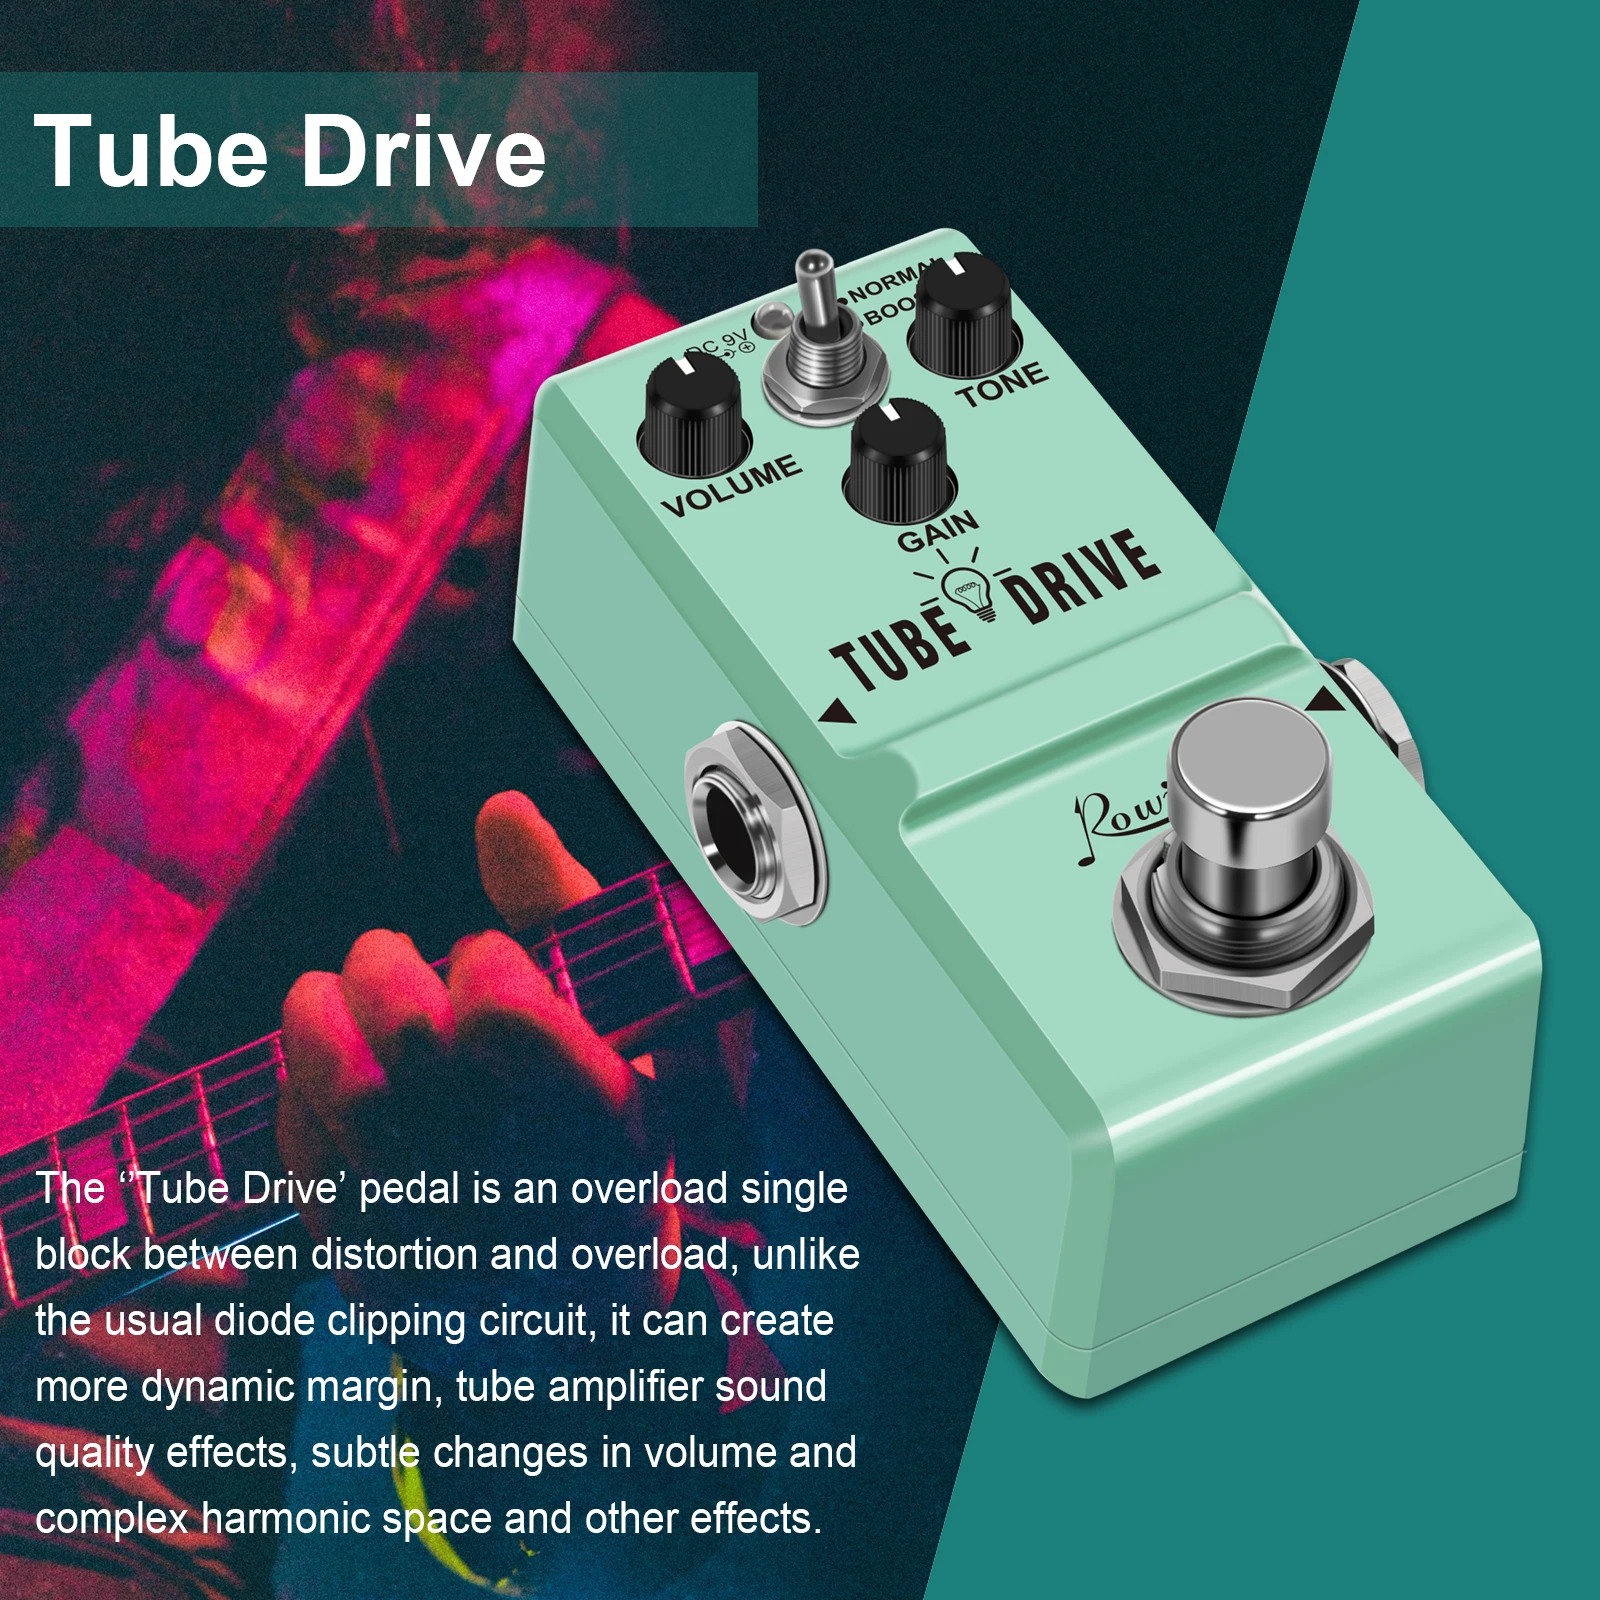 

Rowin-Guitar Tube Drive Pedal, Analog Overdrive Pedals, Classic Distortion Amp Pedals, 2 Modes, Mini Size, LN-328